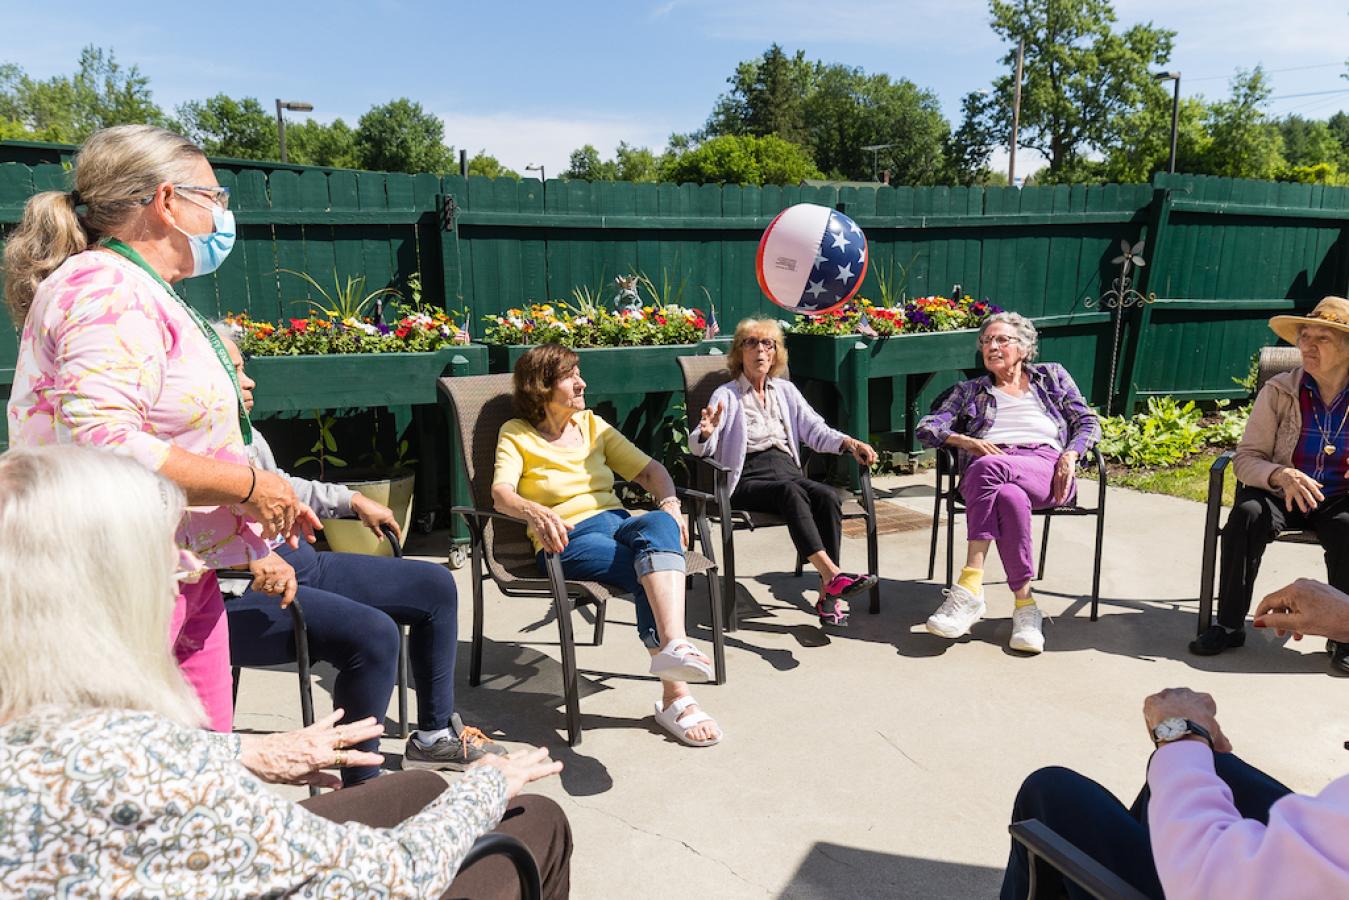 Residents playing with an American flag beach ball outdoors.